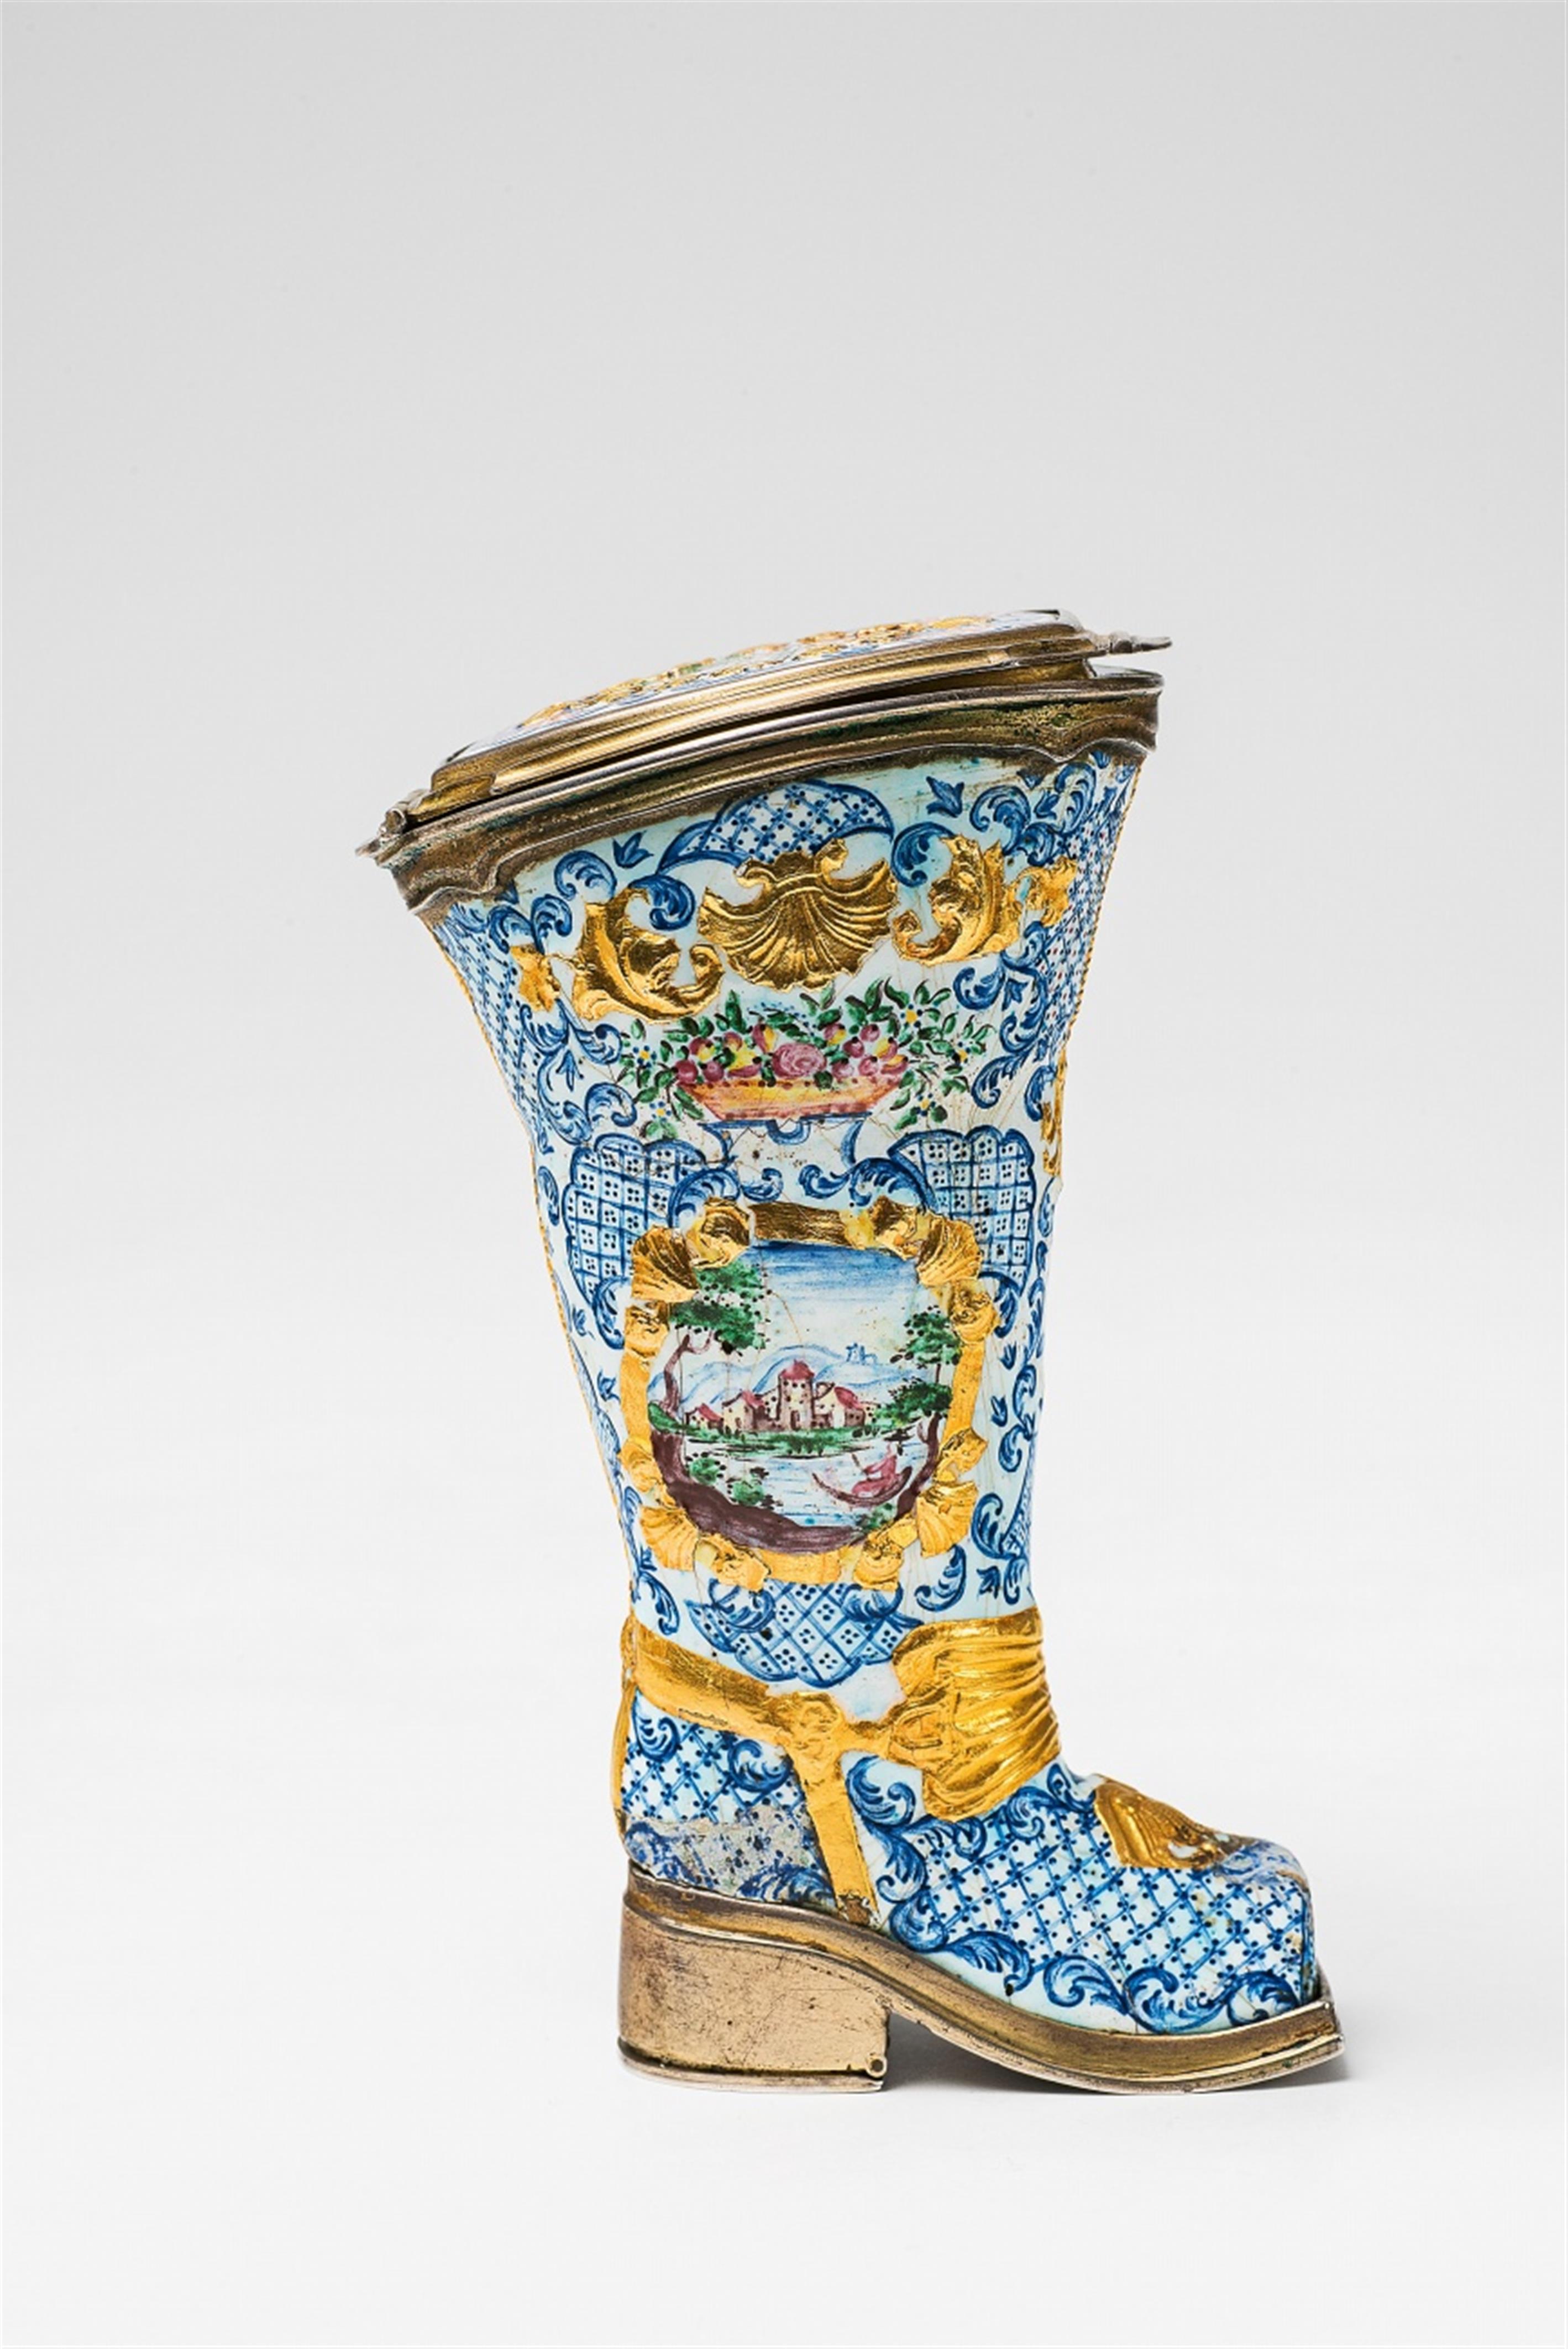 An important enamelled snuff box formed as a boot - image-2